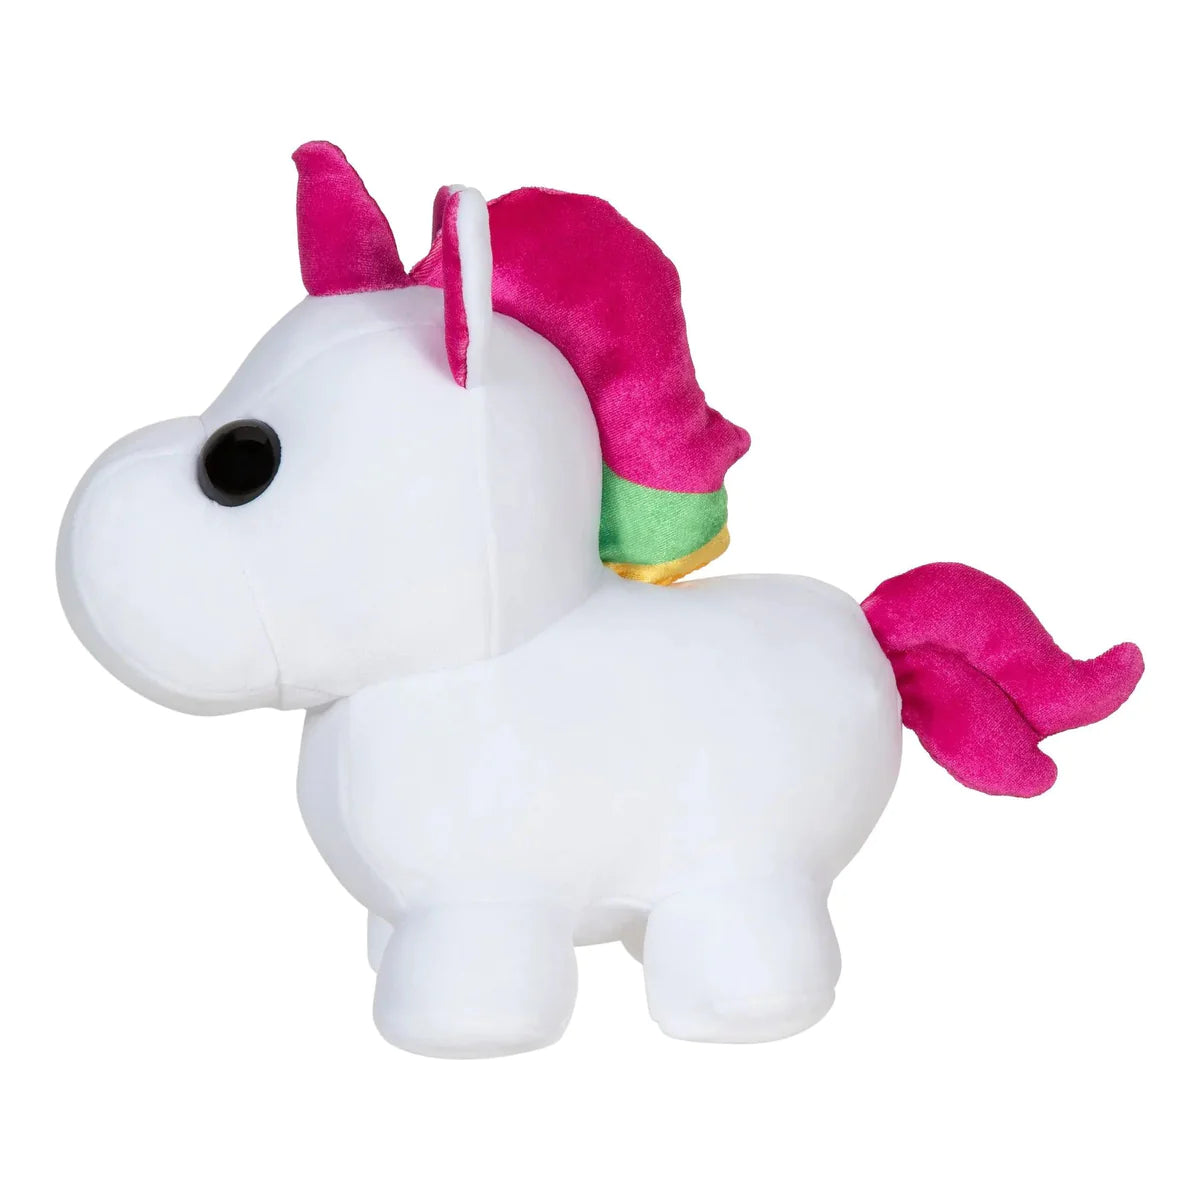 Adopt Me Series 1 Unicorn 8 Inch Collector Plush Soft Toy